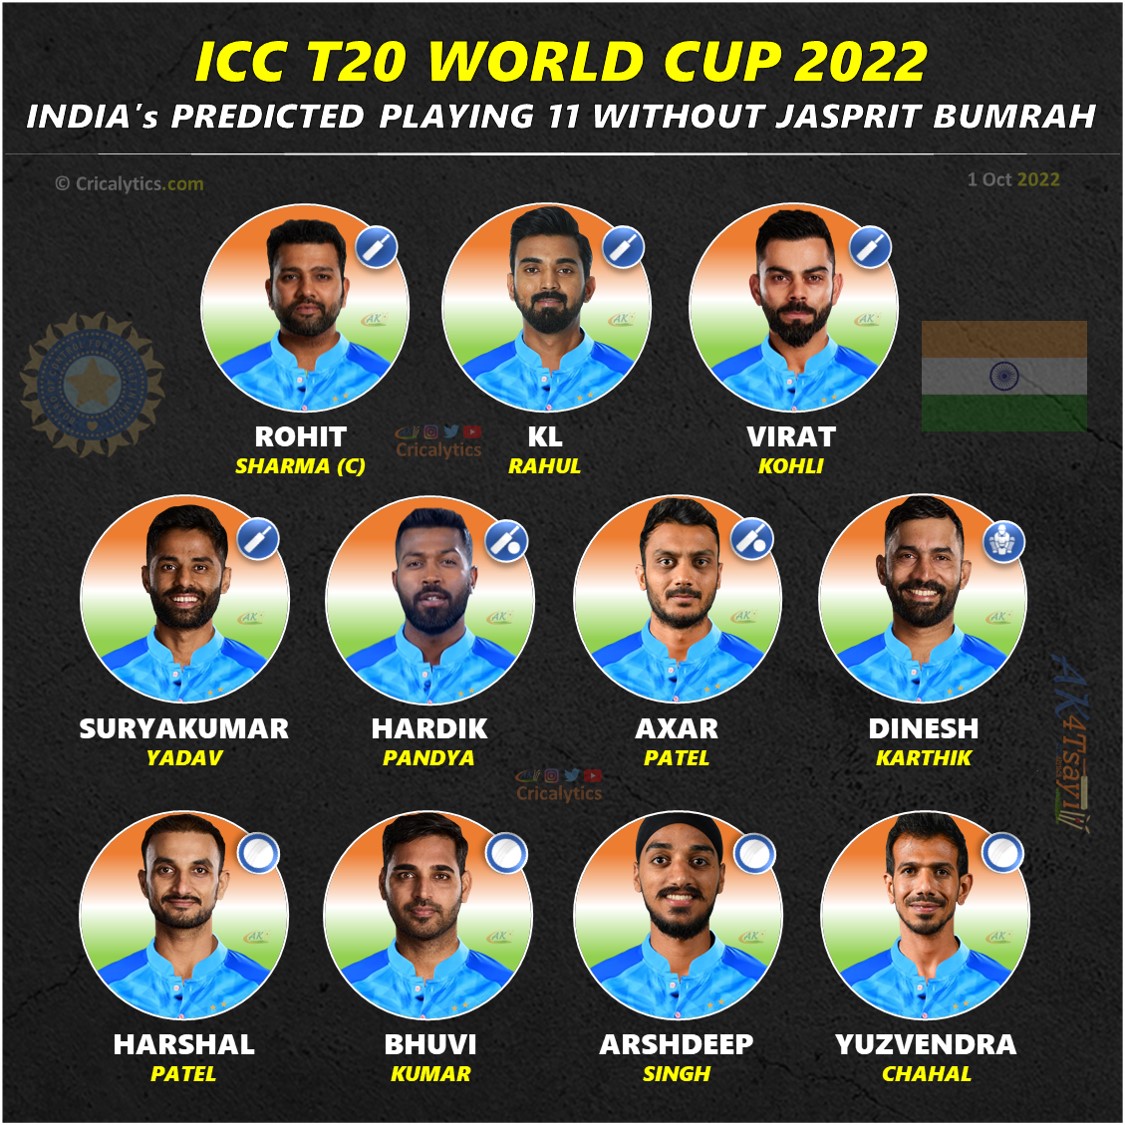 T20 World Cup 2022 Predicted Playing 11 for India No Bumrah